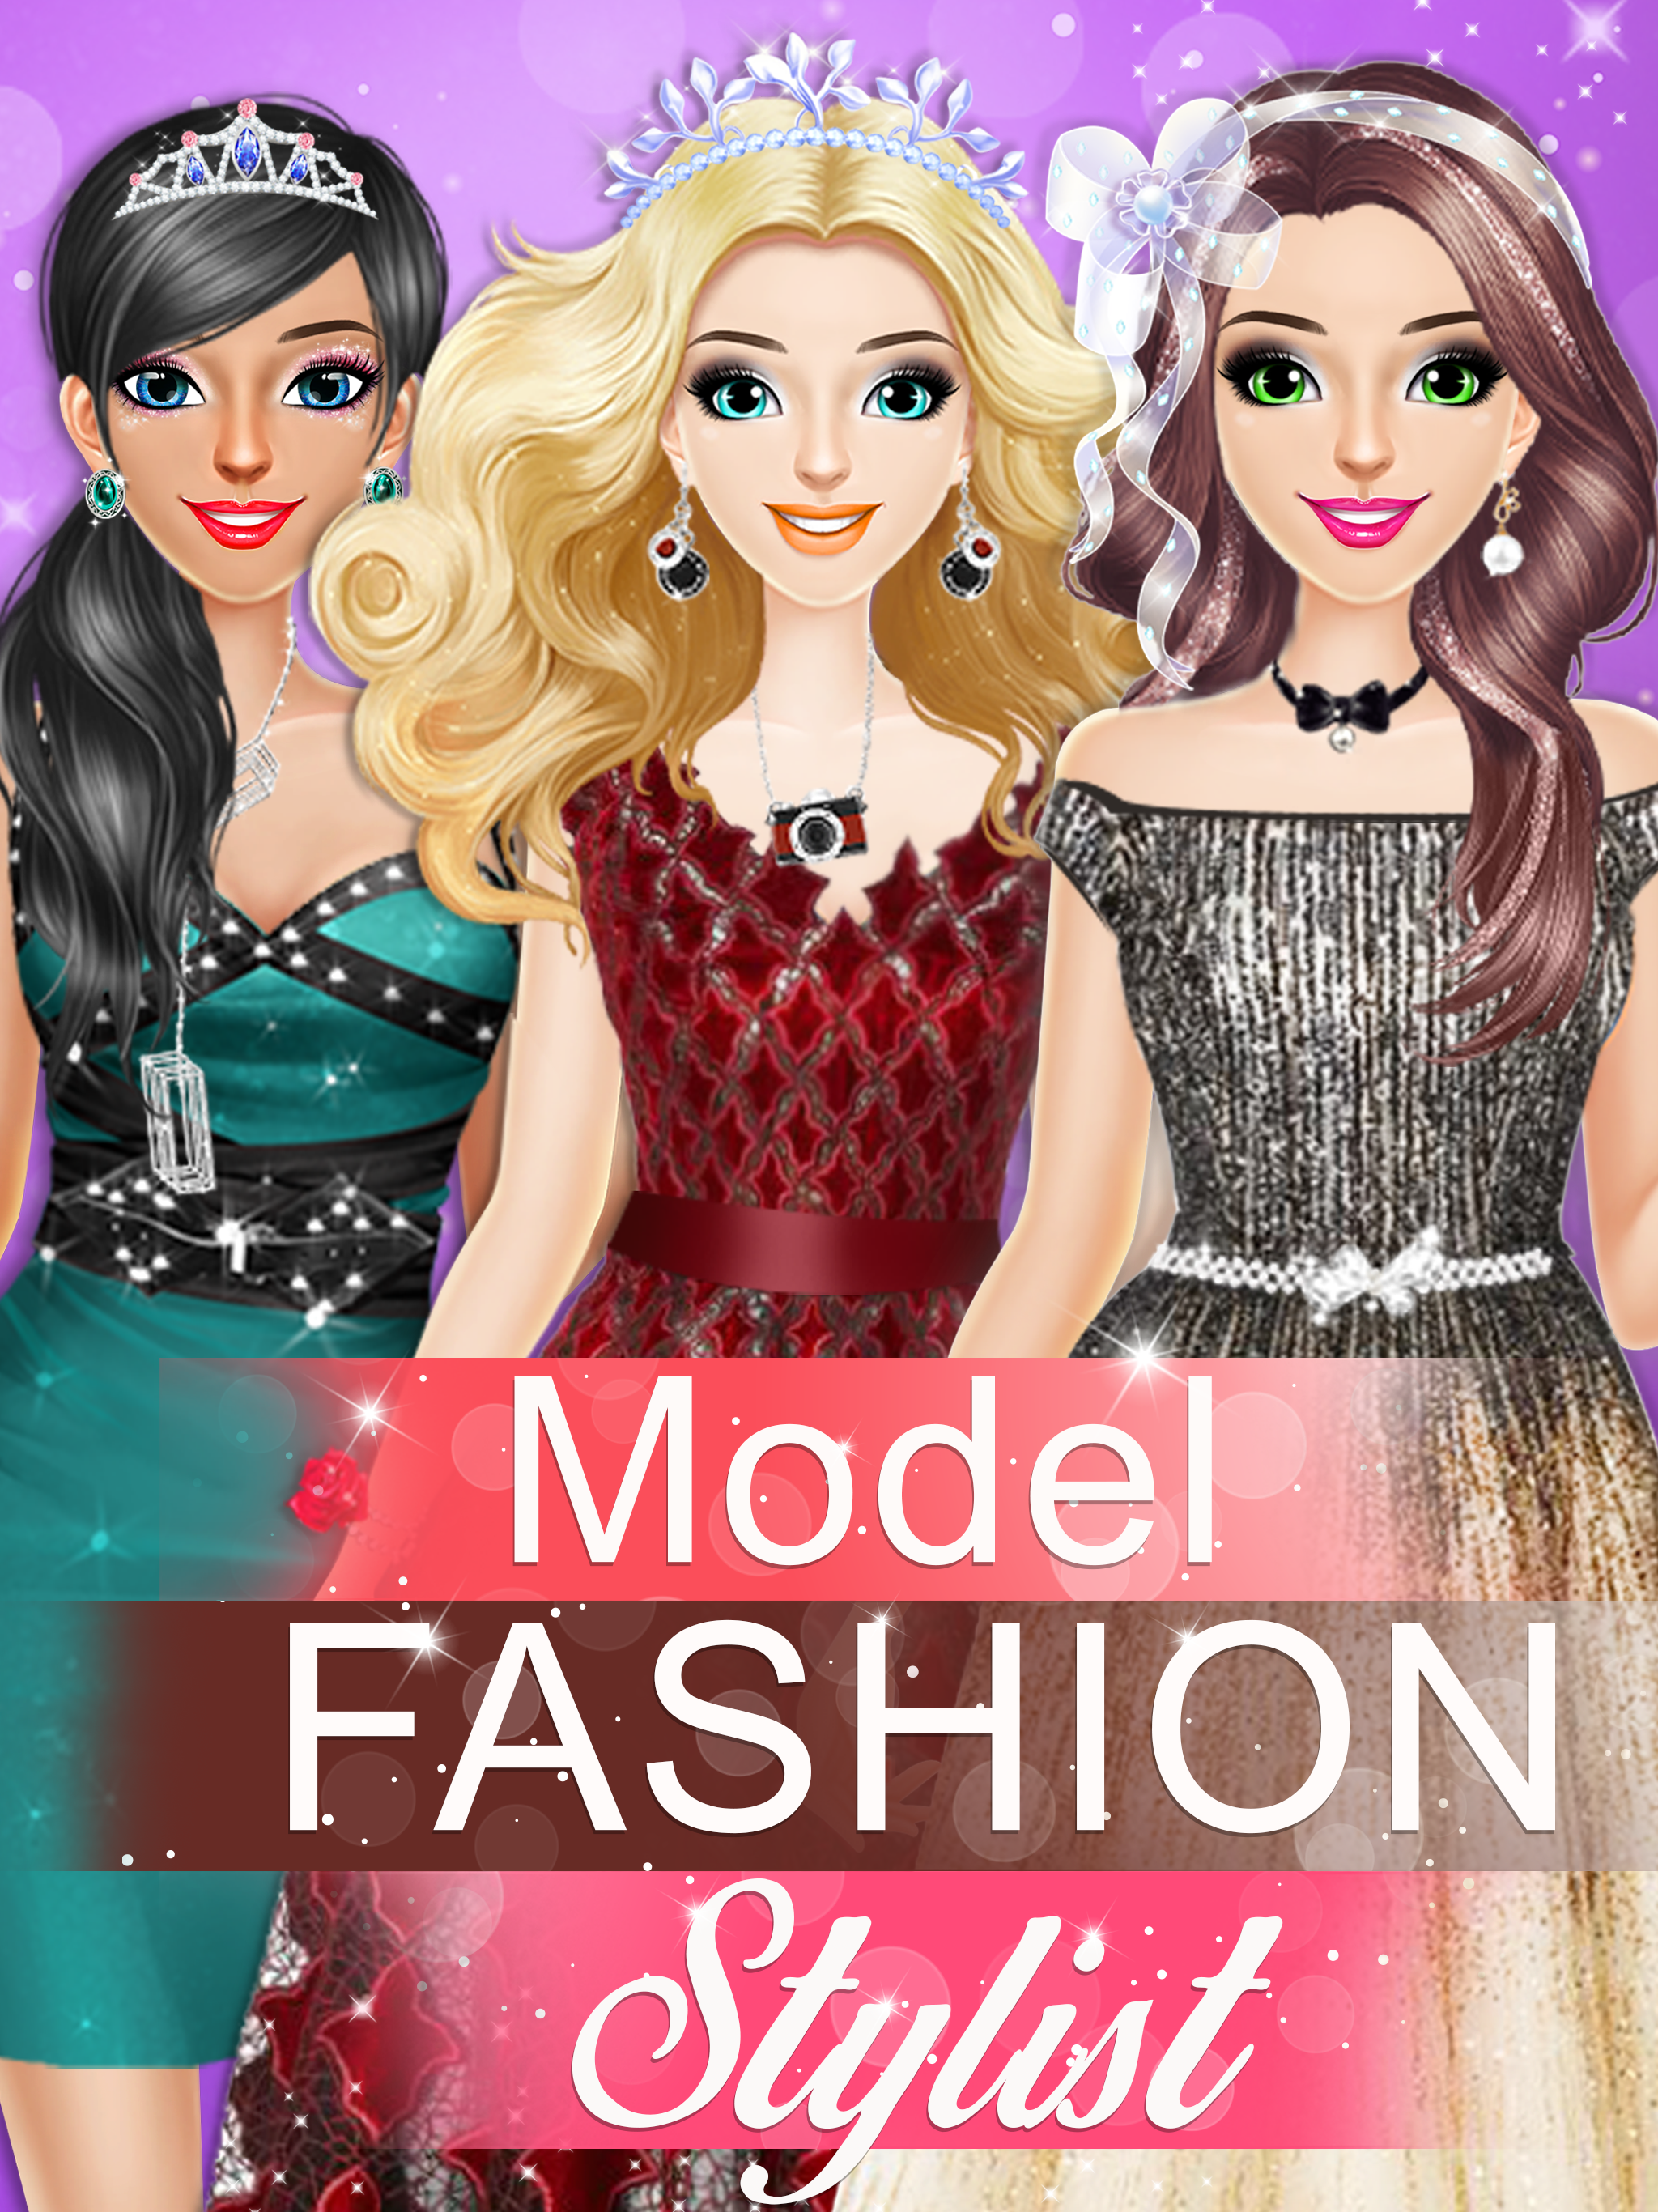 Fashion Game Dress up & Makeup APK 25.3.1 for Android – Download Fashion Game  Dress up & Makeup APK Latest Version from APKFab.com